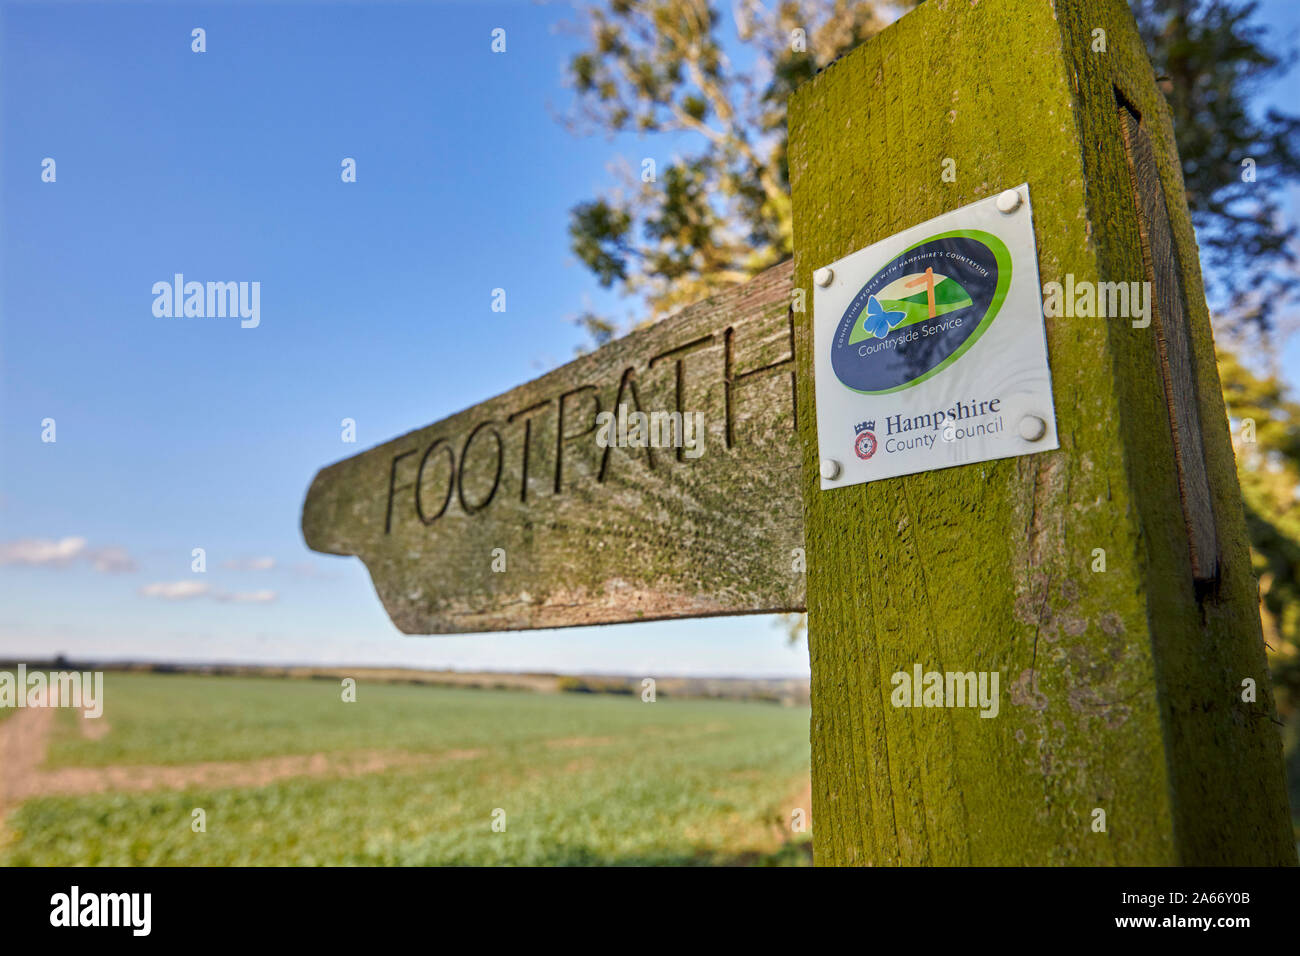 Footpath sign post near Upper Wield. Hampshire, England. Stock Photo